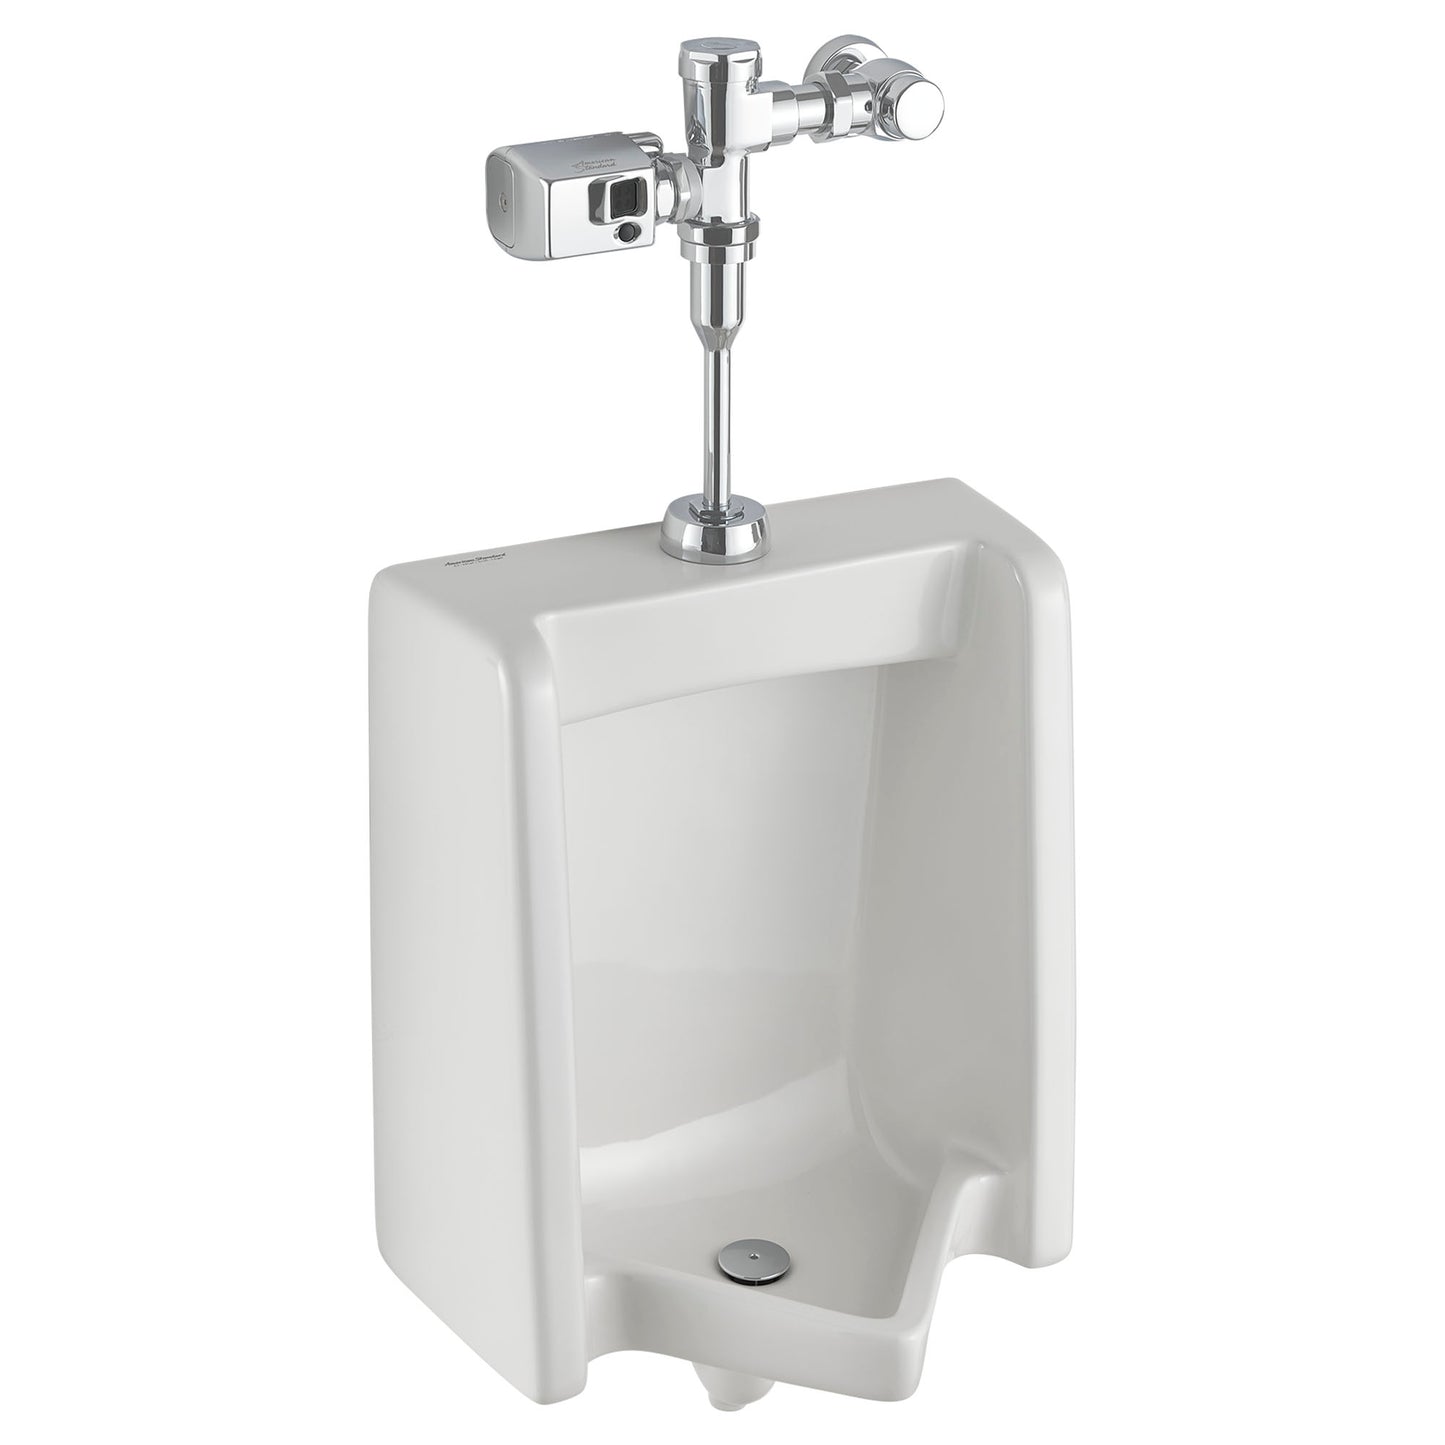 Washbrook Wall Hung FloWise Universal Urinal with 3/4" Top Spud